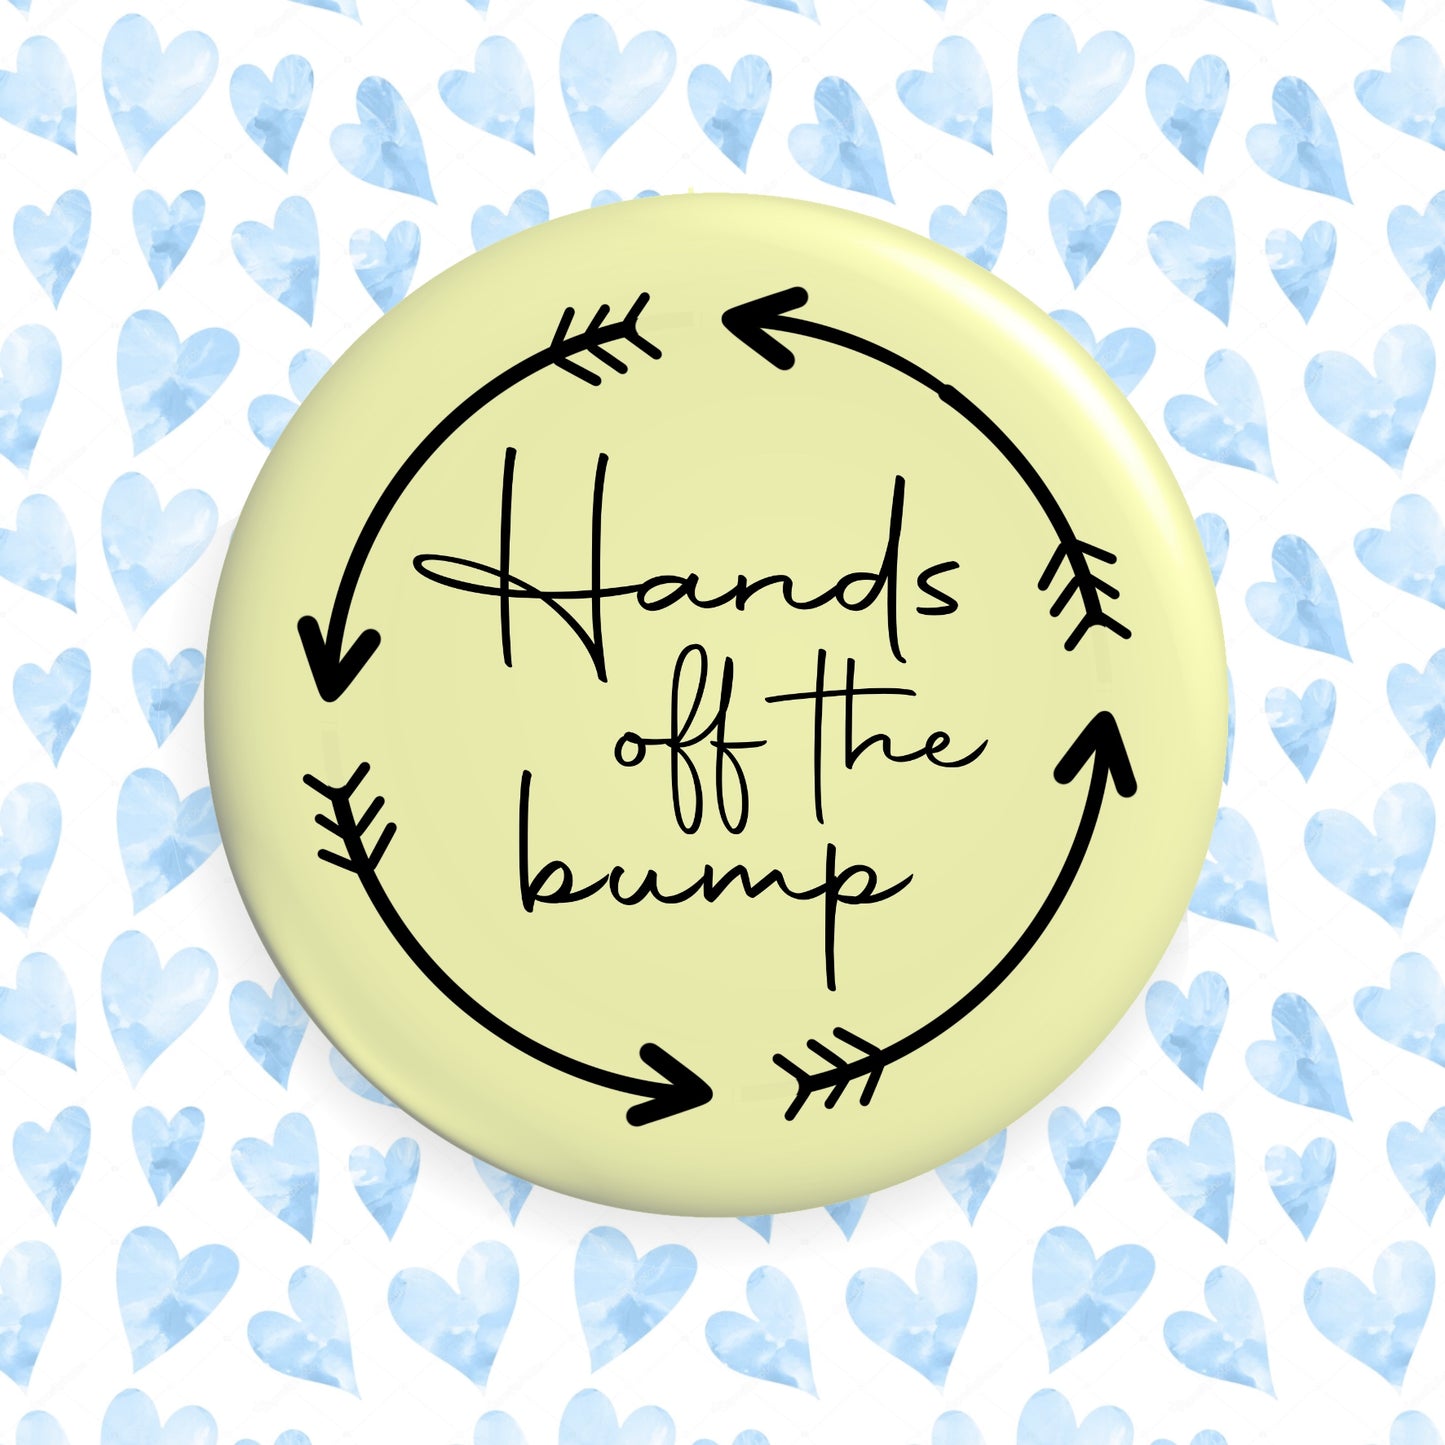 Hands off the Bump Button Badge